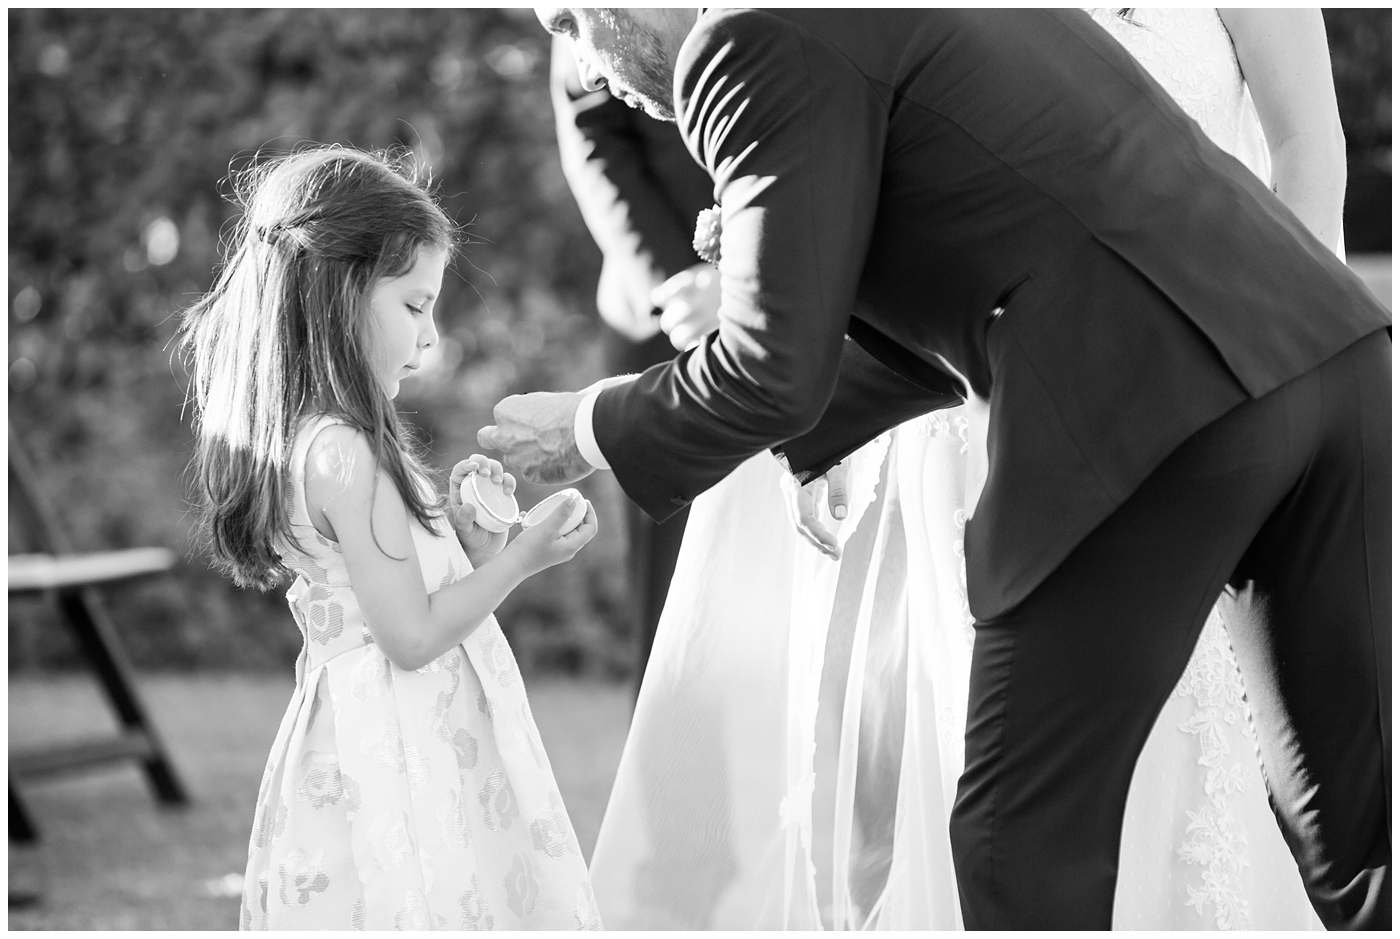 Flowergirl giving the groom the wedding rings during ceremony